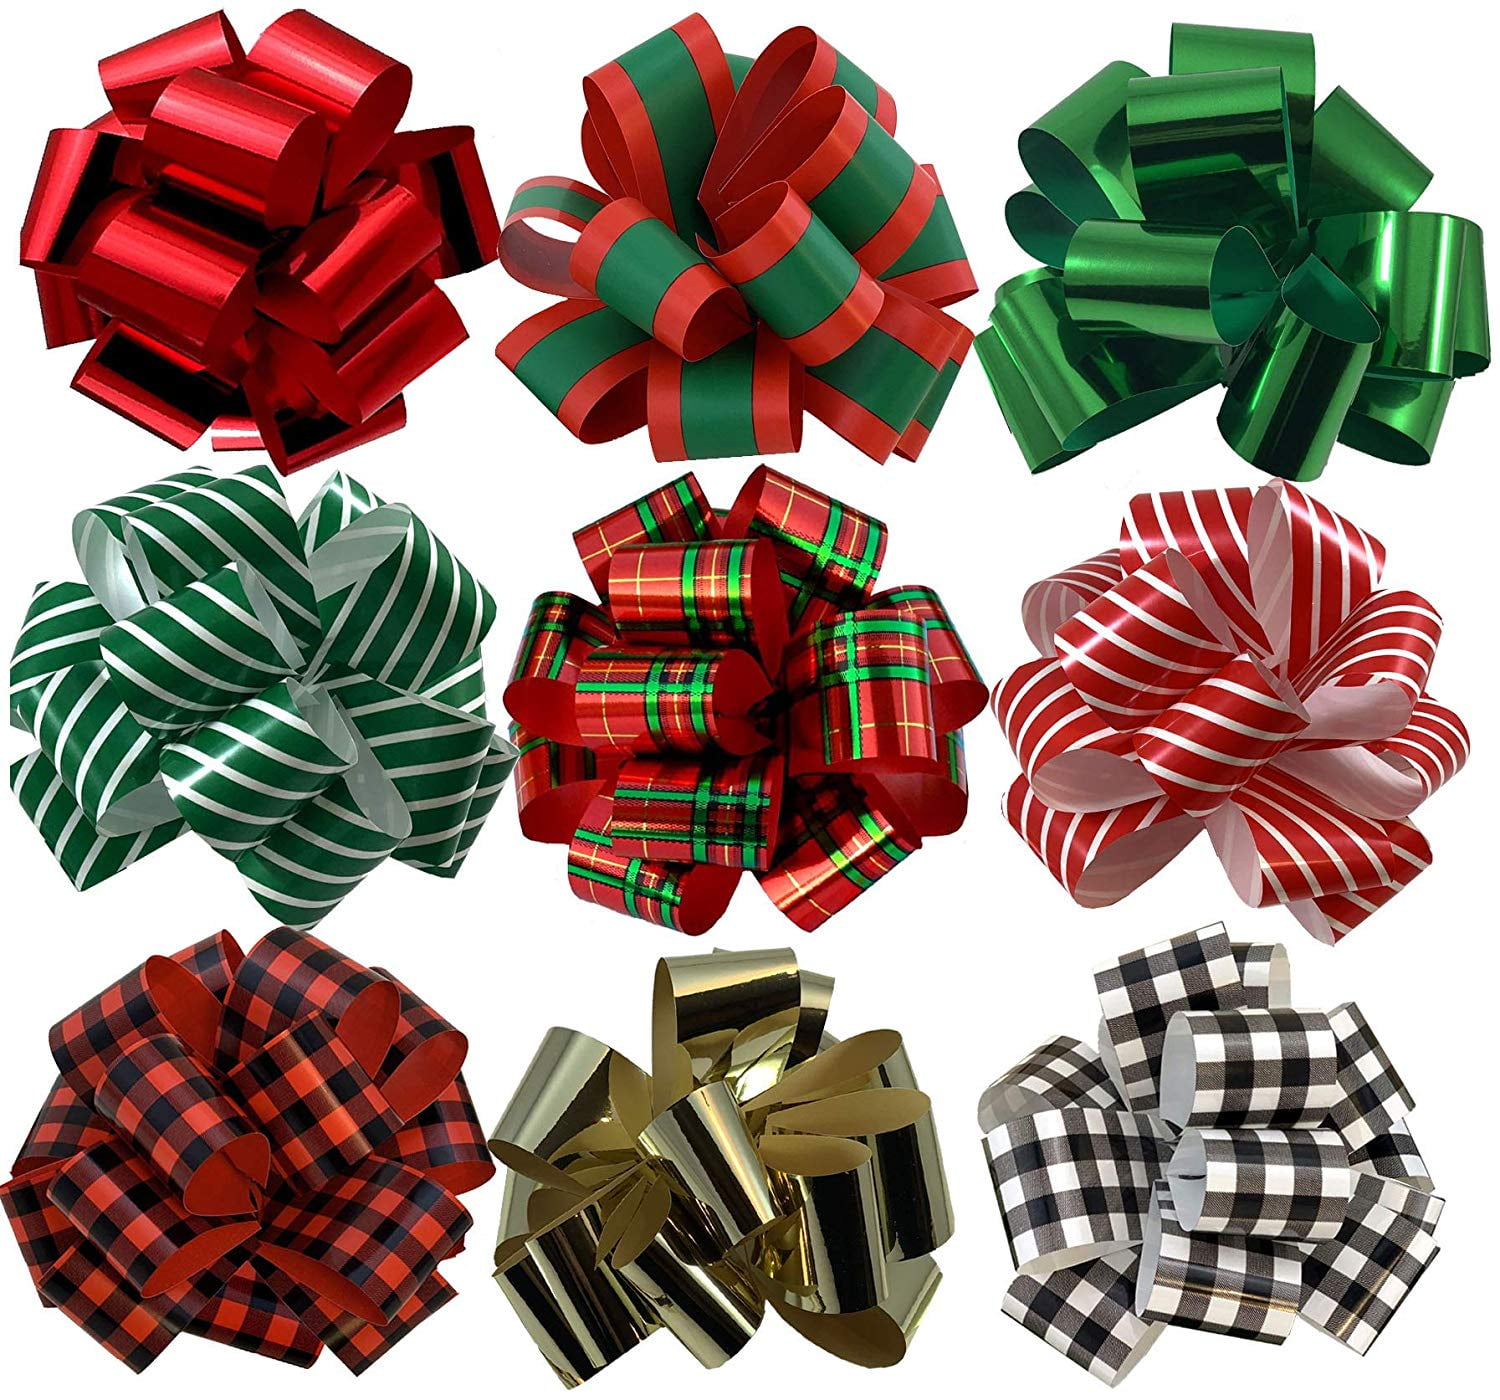 Christmas Gift Wrap Pull Bows - 5 inch Wide, Set of 9, Metallic Red, Green, Gold, Stripes, Plaid, Buffalo Check, Ribbons for Christmas Presents